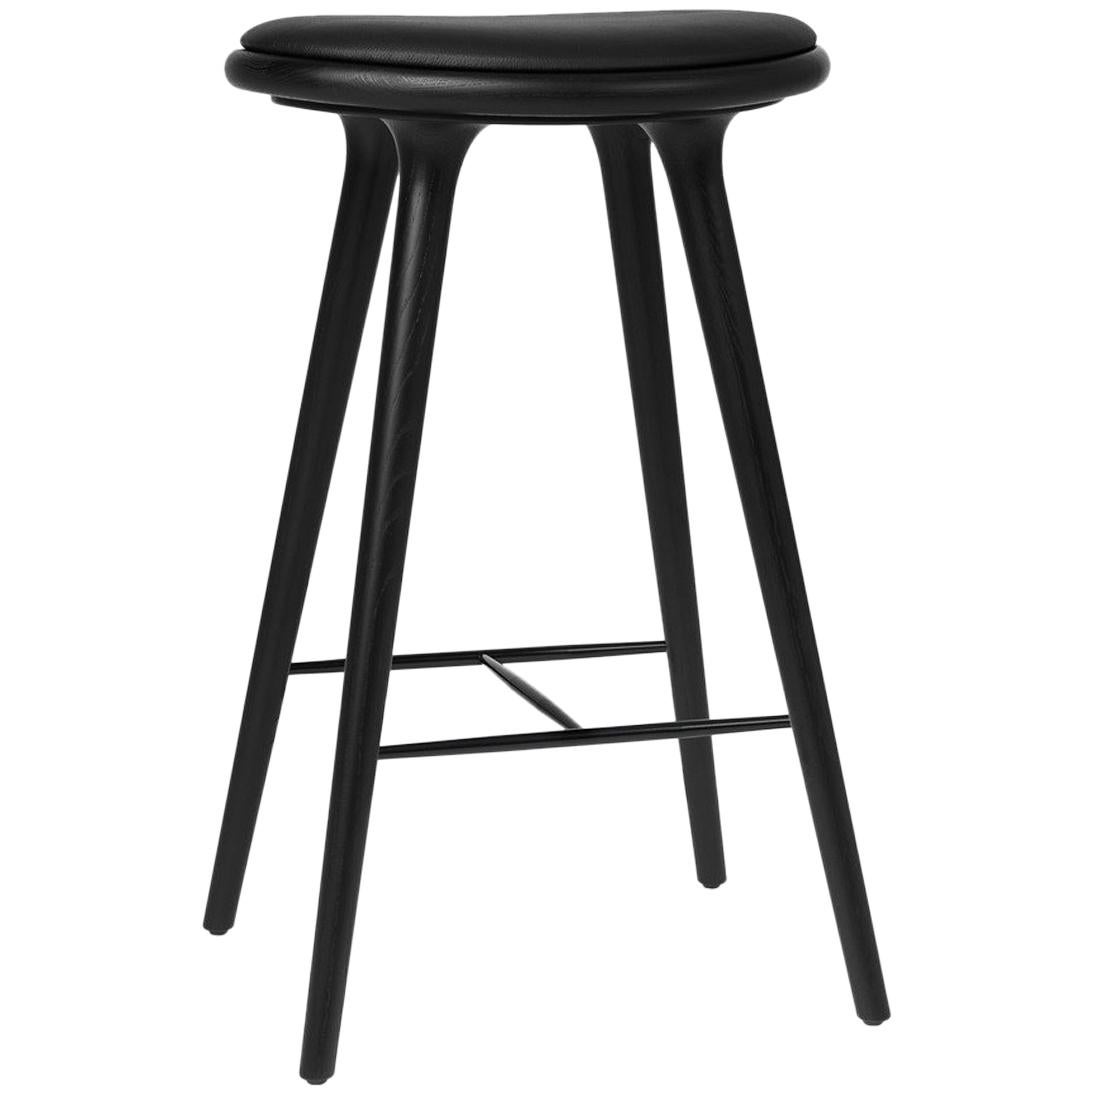 Bar Height High Stool, Black Stained Beech Wood Leather Seat by Mater Dessign